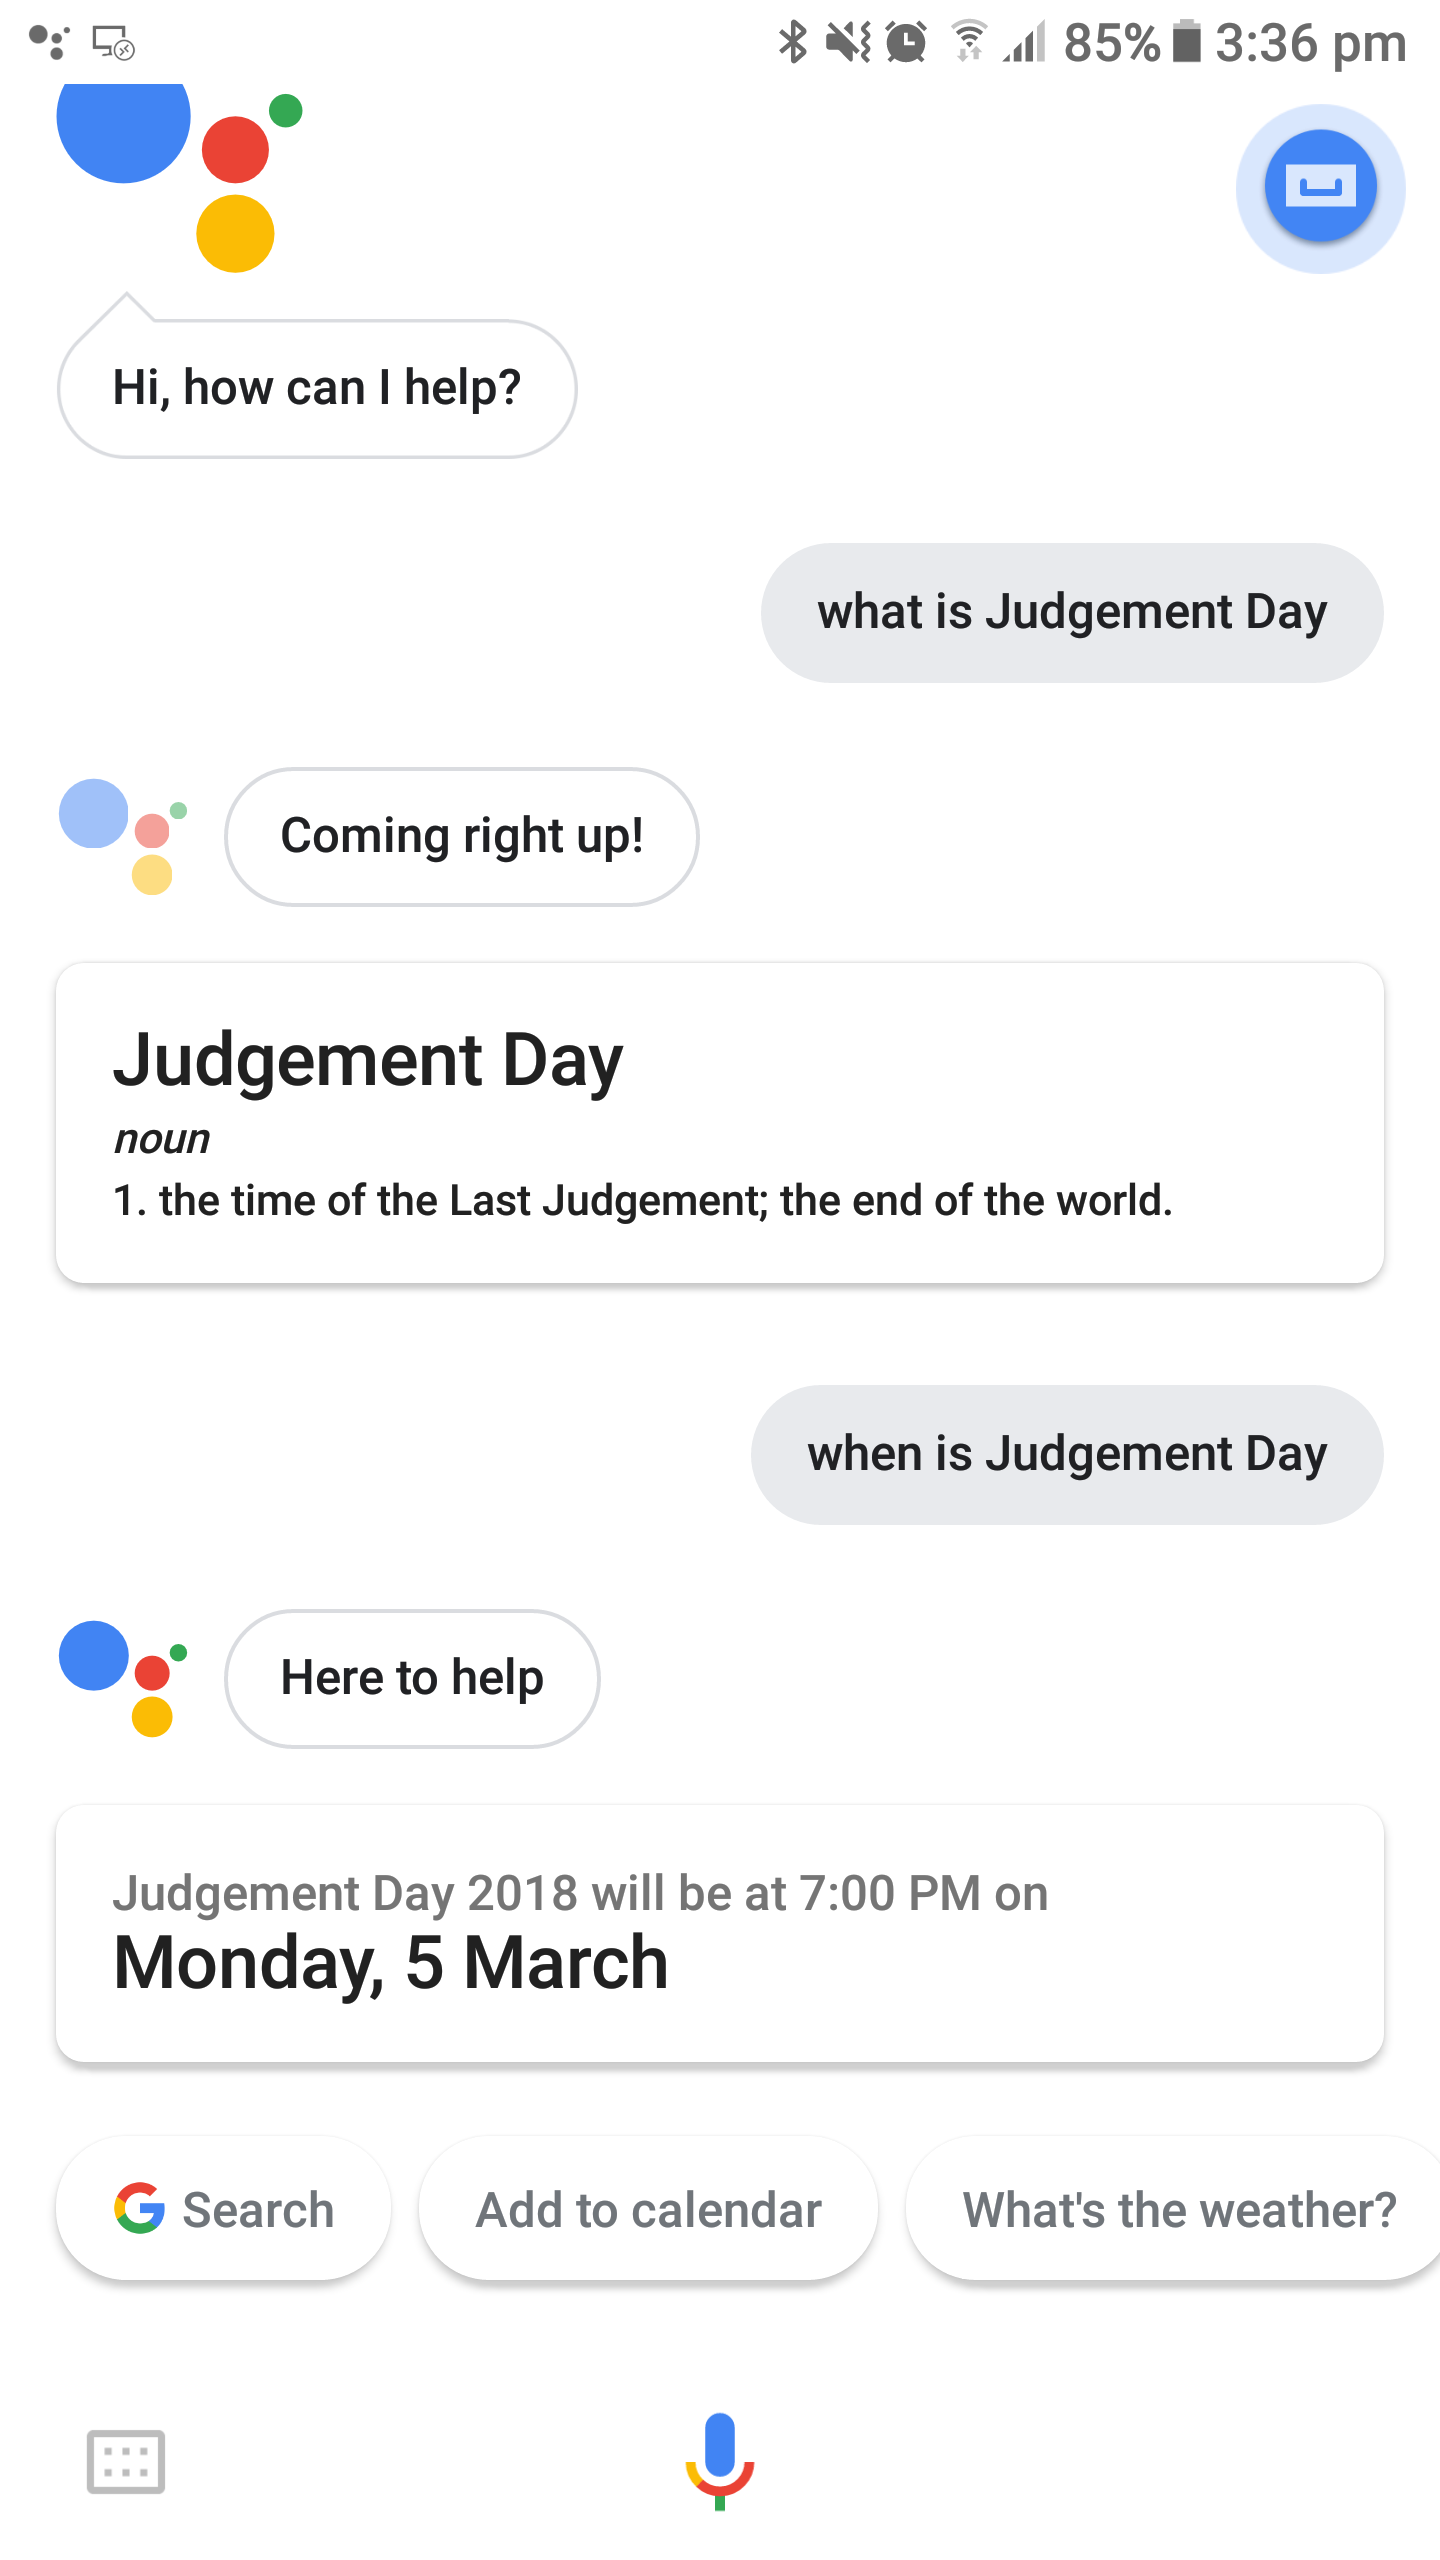 Google assistant knows too much